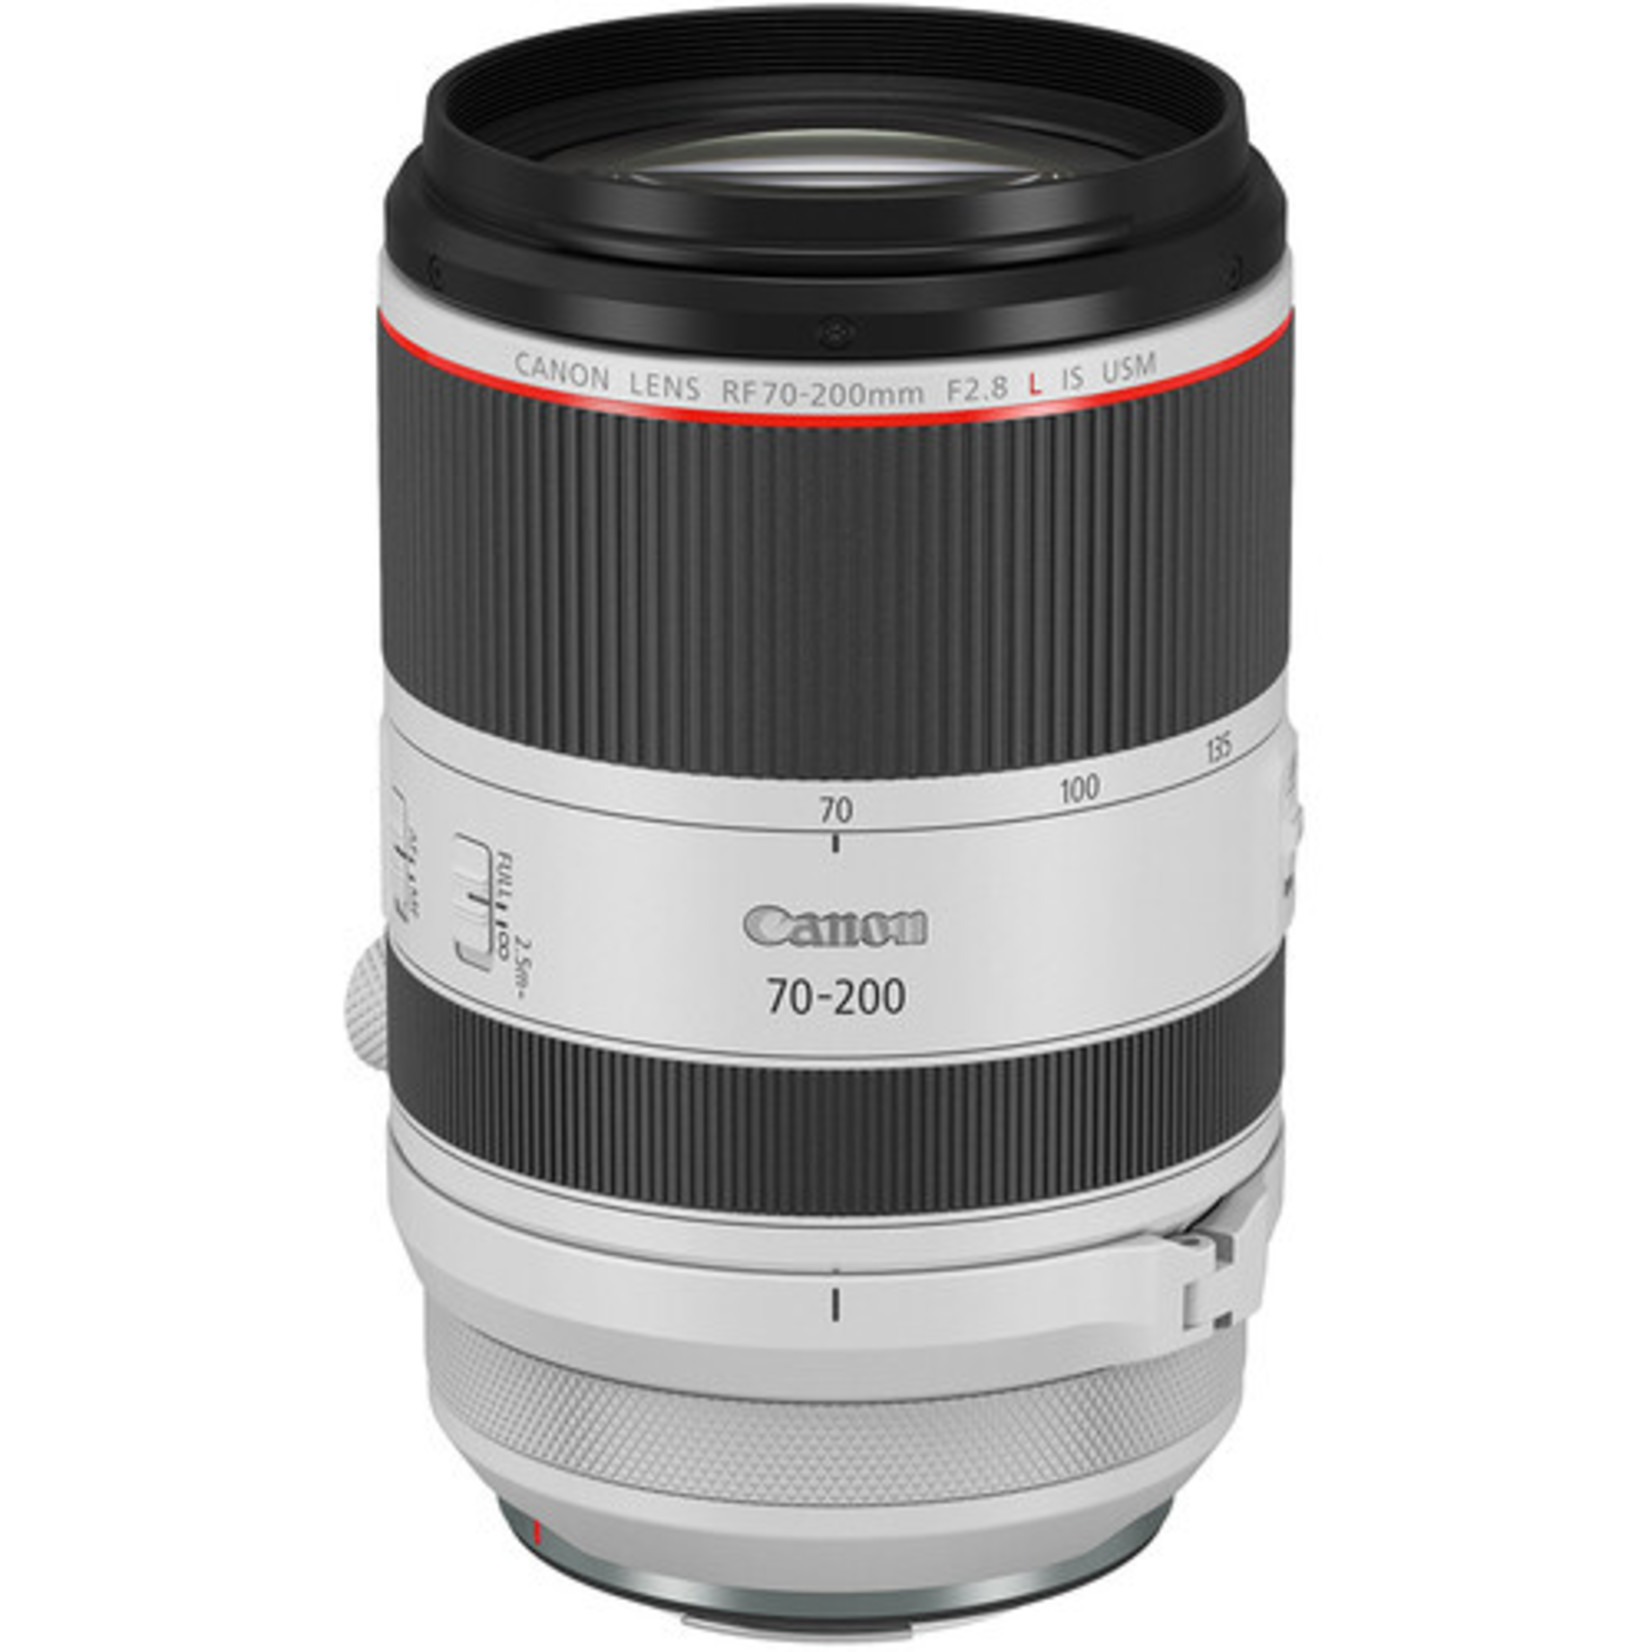 Canon Canon RF 70-200mm f/2.8 L IS USM Lens